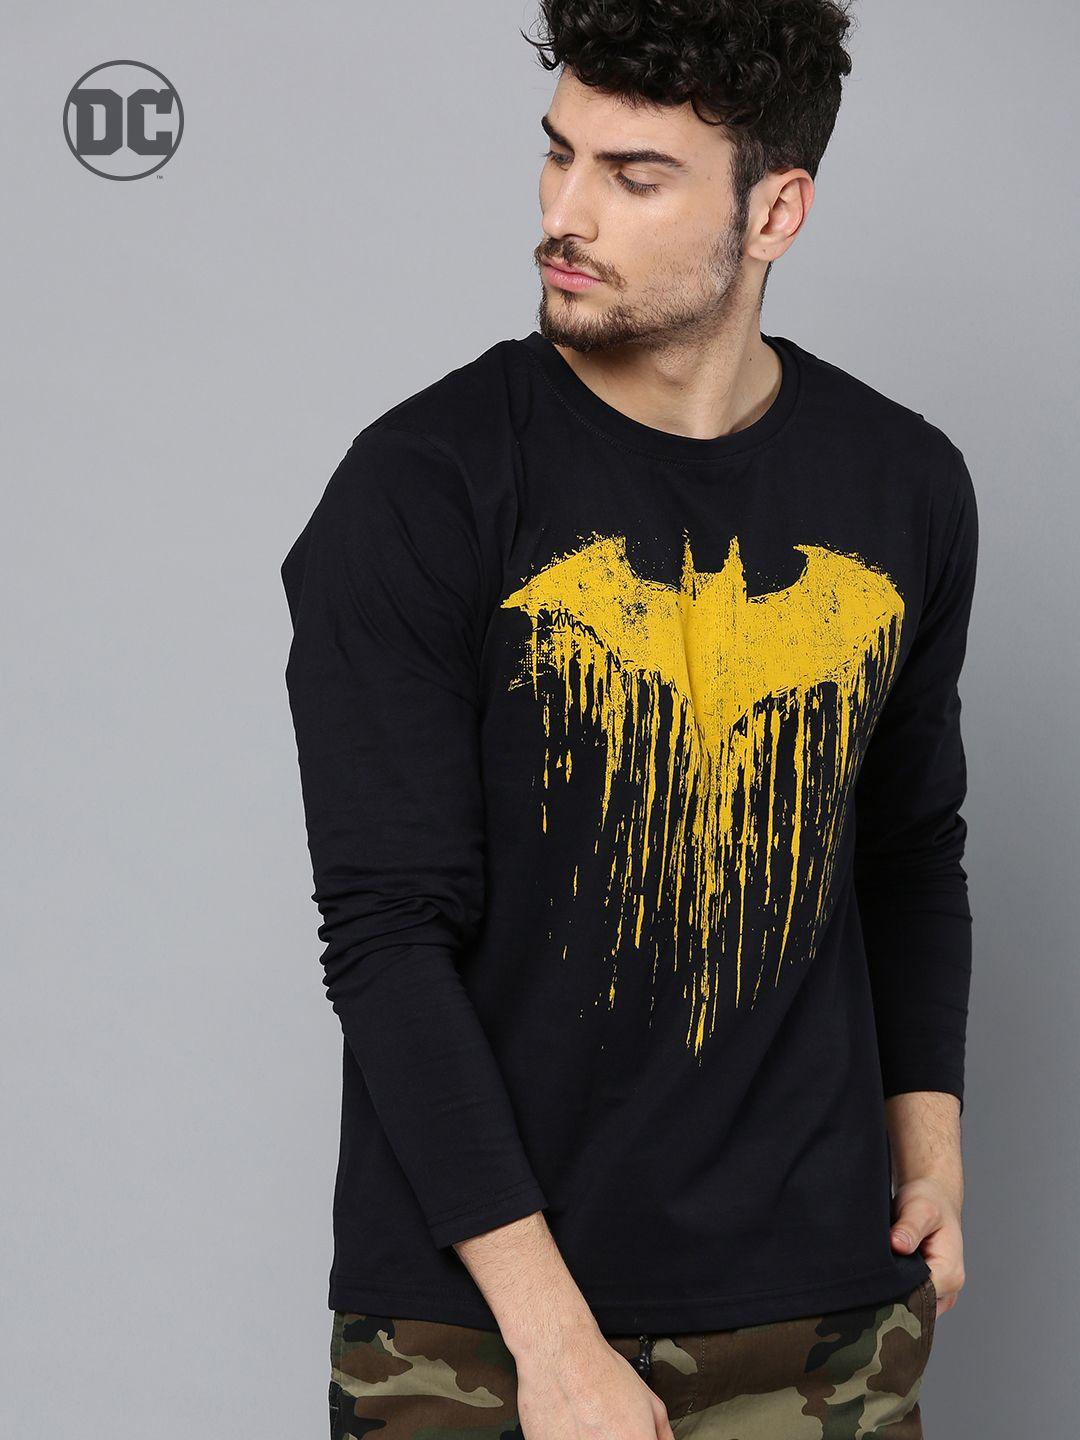 justice league men black & yellow printed round neck t-shirt